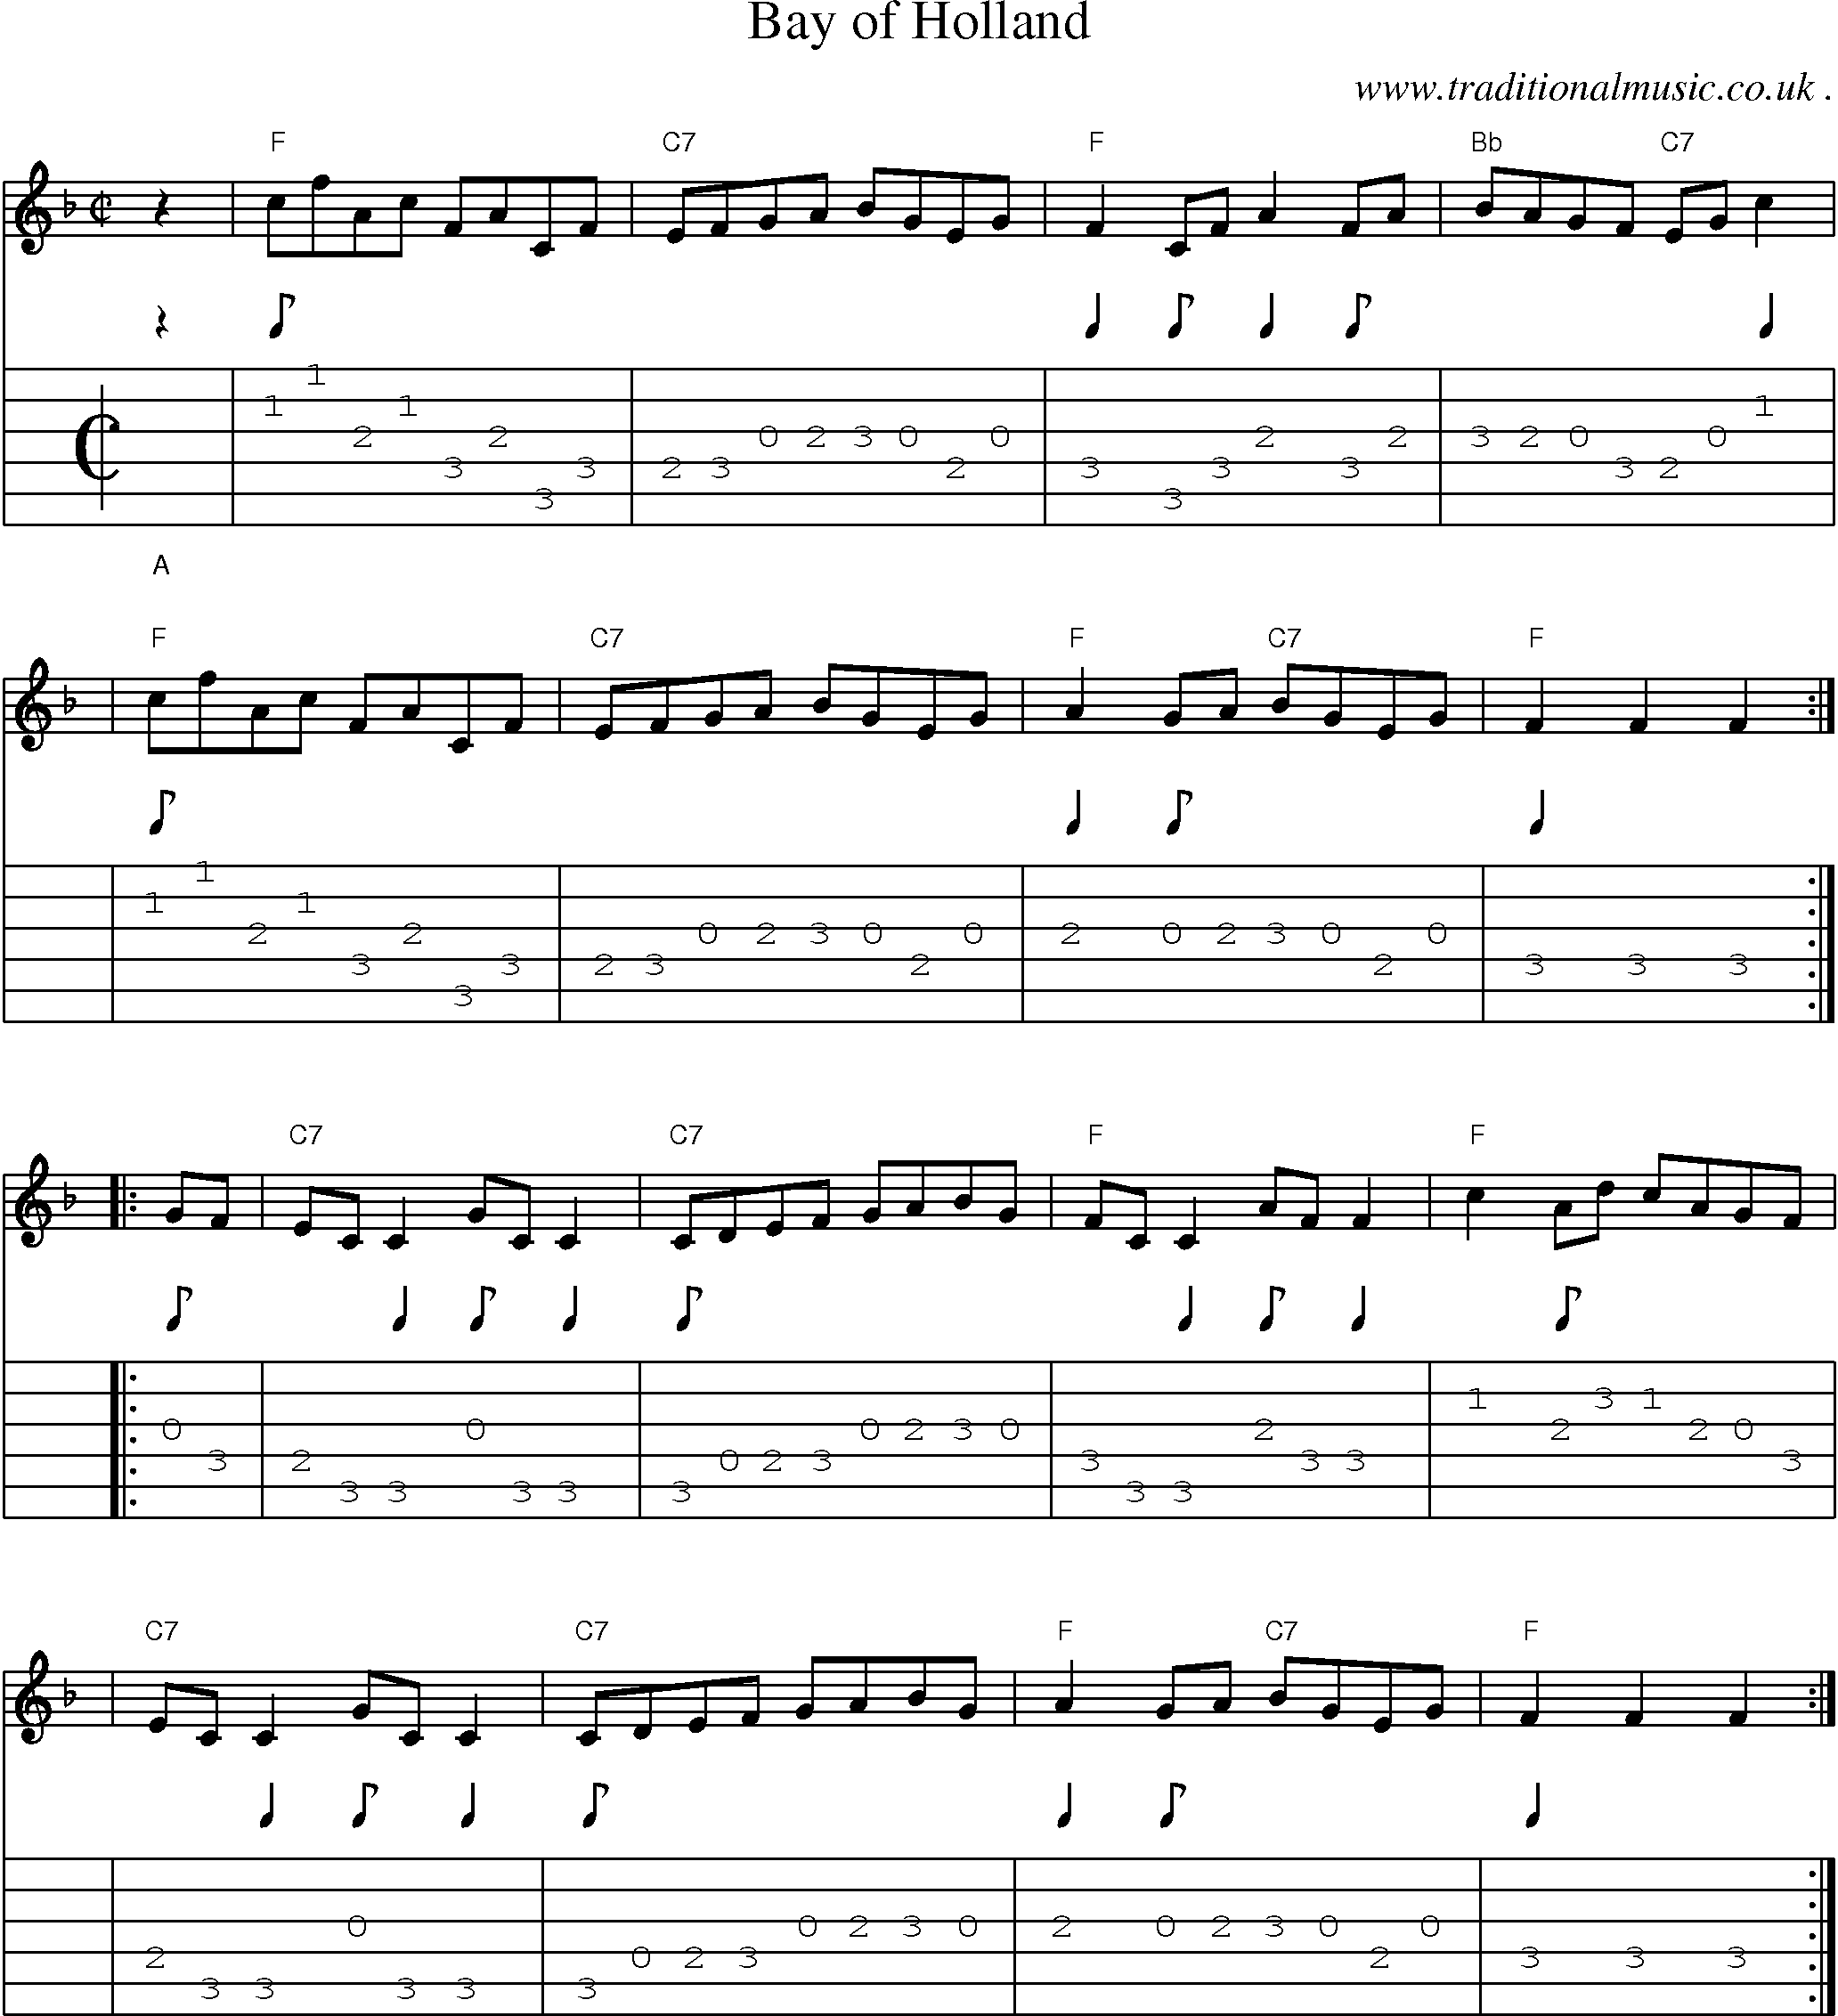 Sheet-music  score, Chords and Guitar Tabs for Bay Of Holland